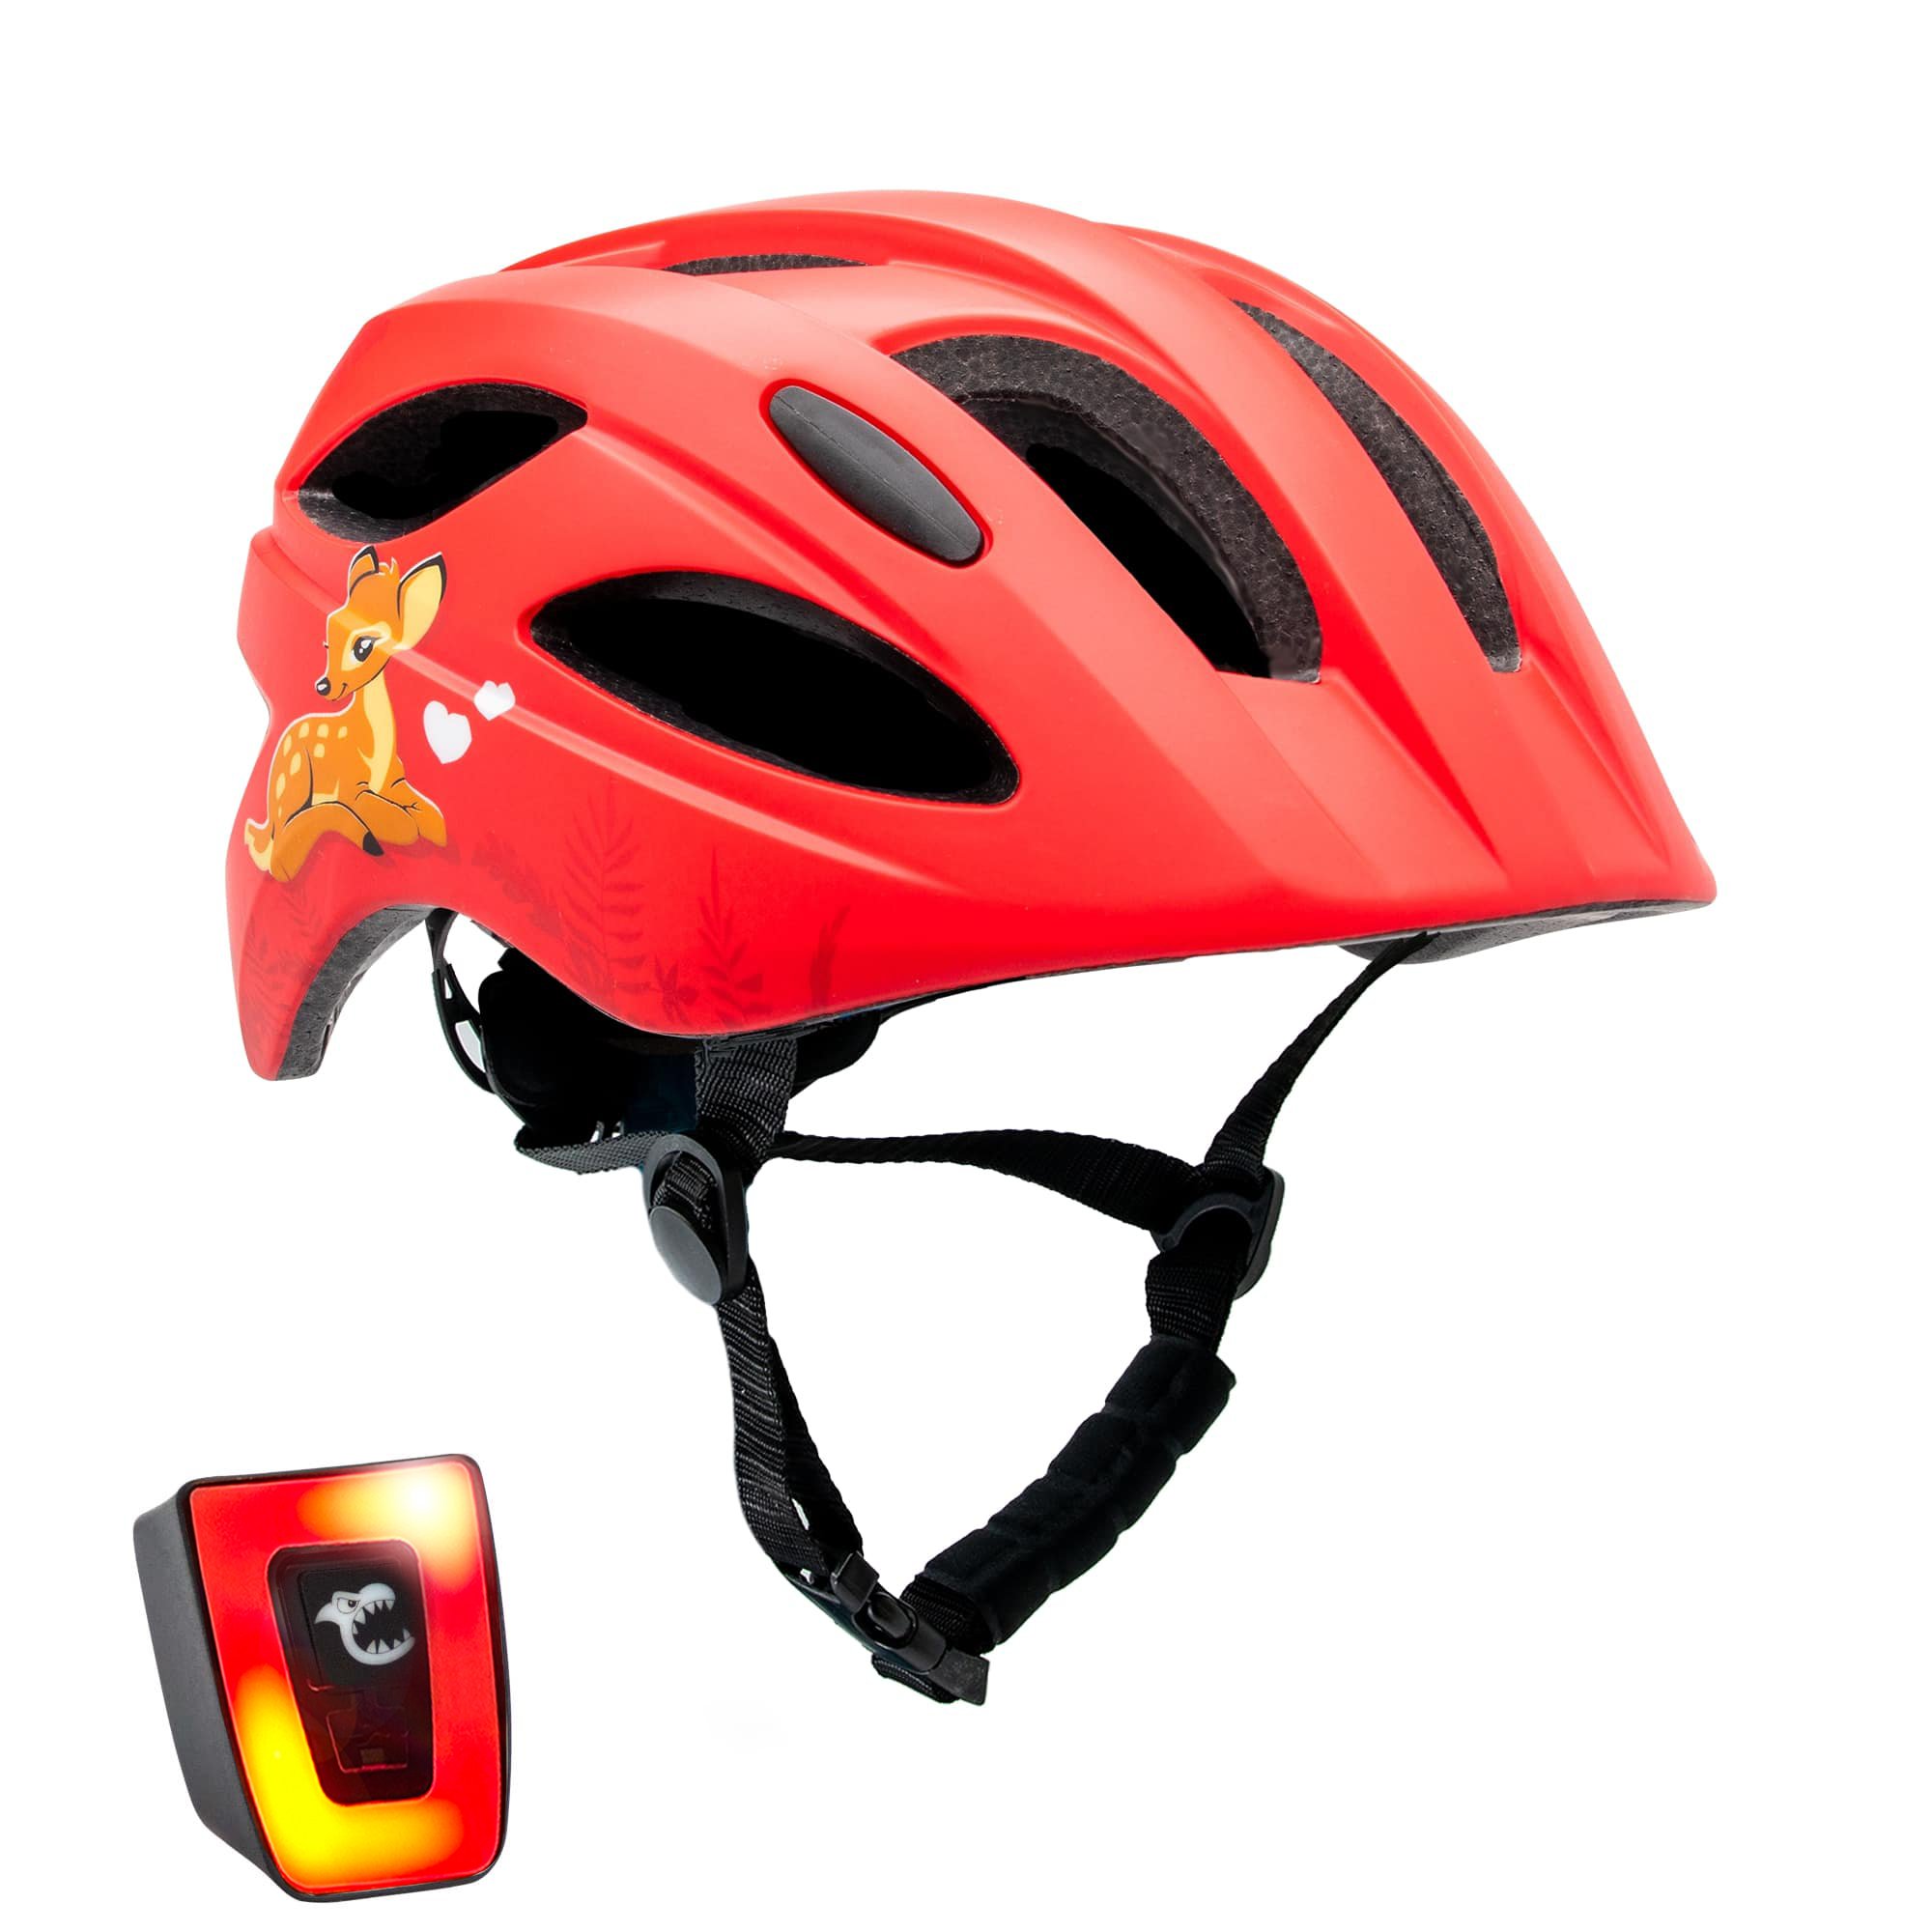 Crazy Safety - Cute Bicycle Helmet - Red (160101-09-01) - Leker